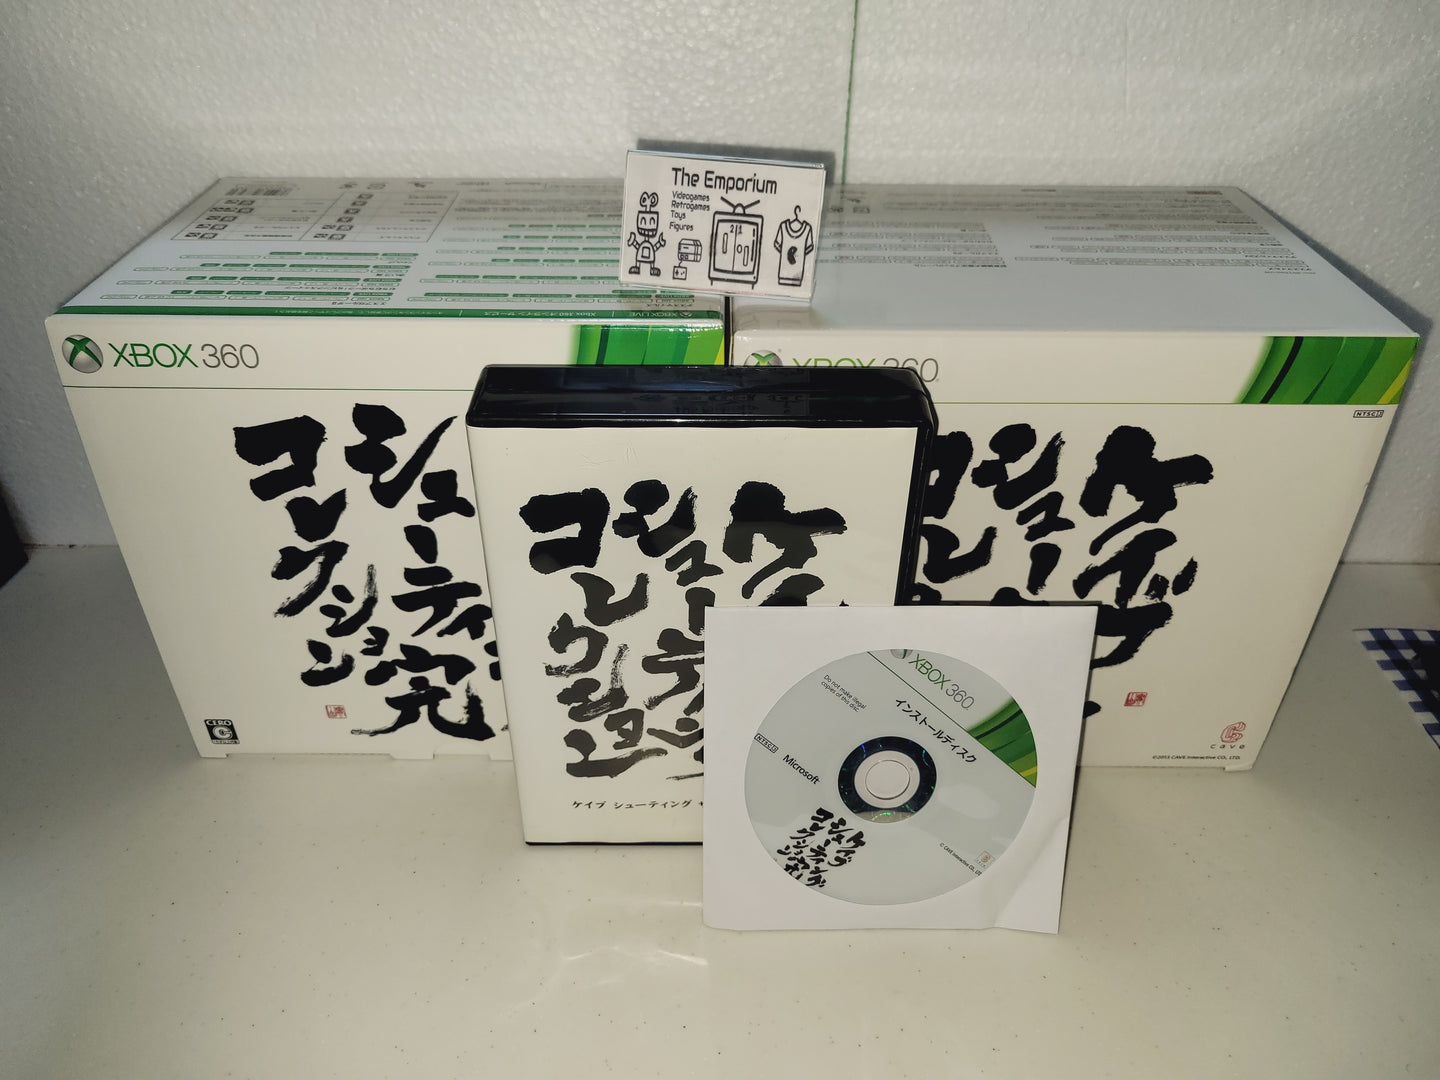 Cave Shooting Collection + Soundtrack box - Microsoft XBox 360